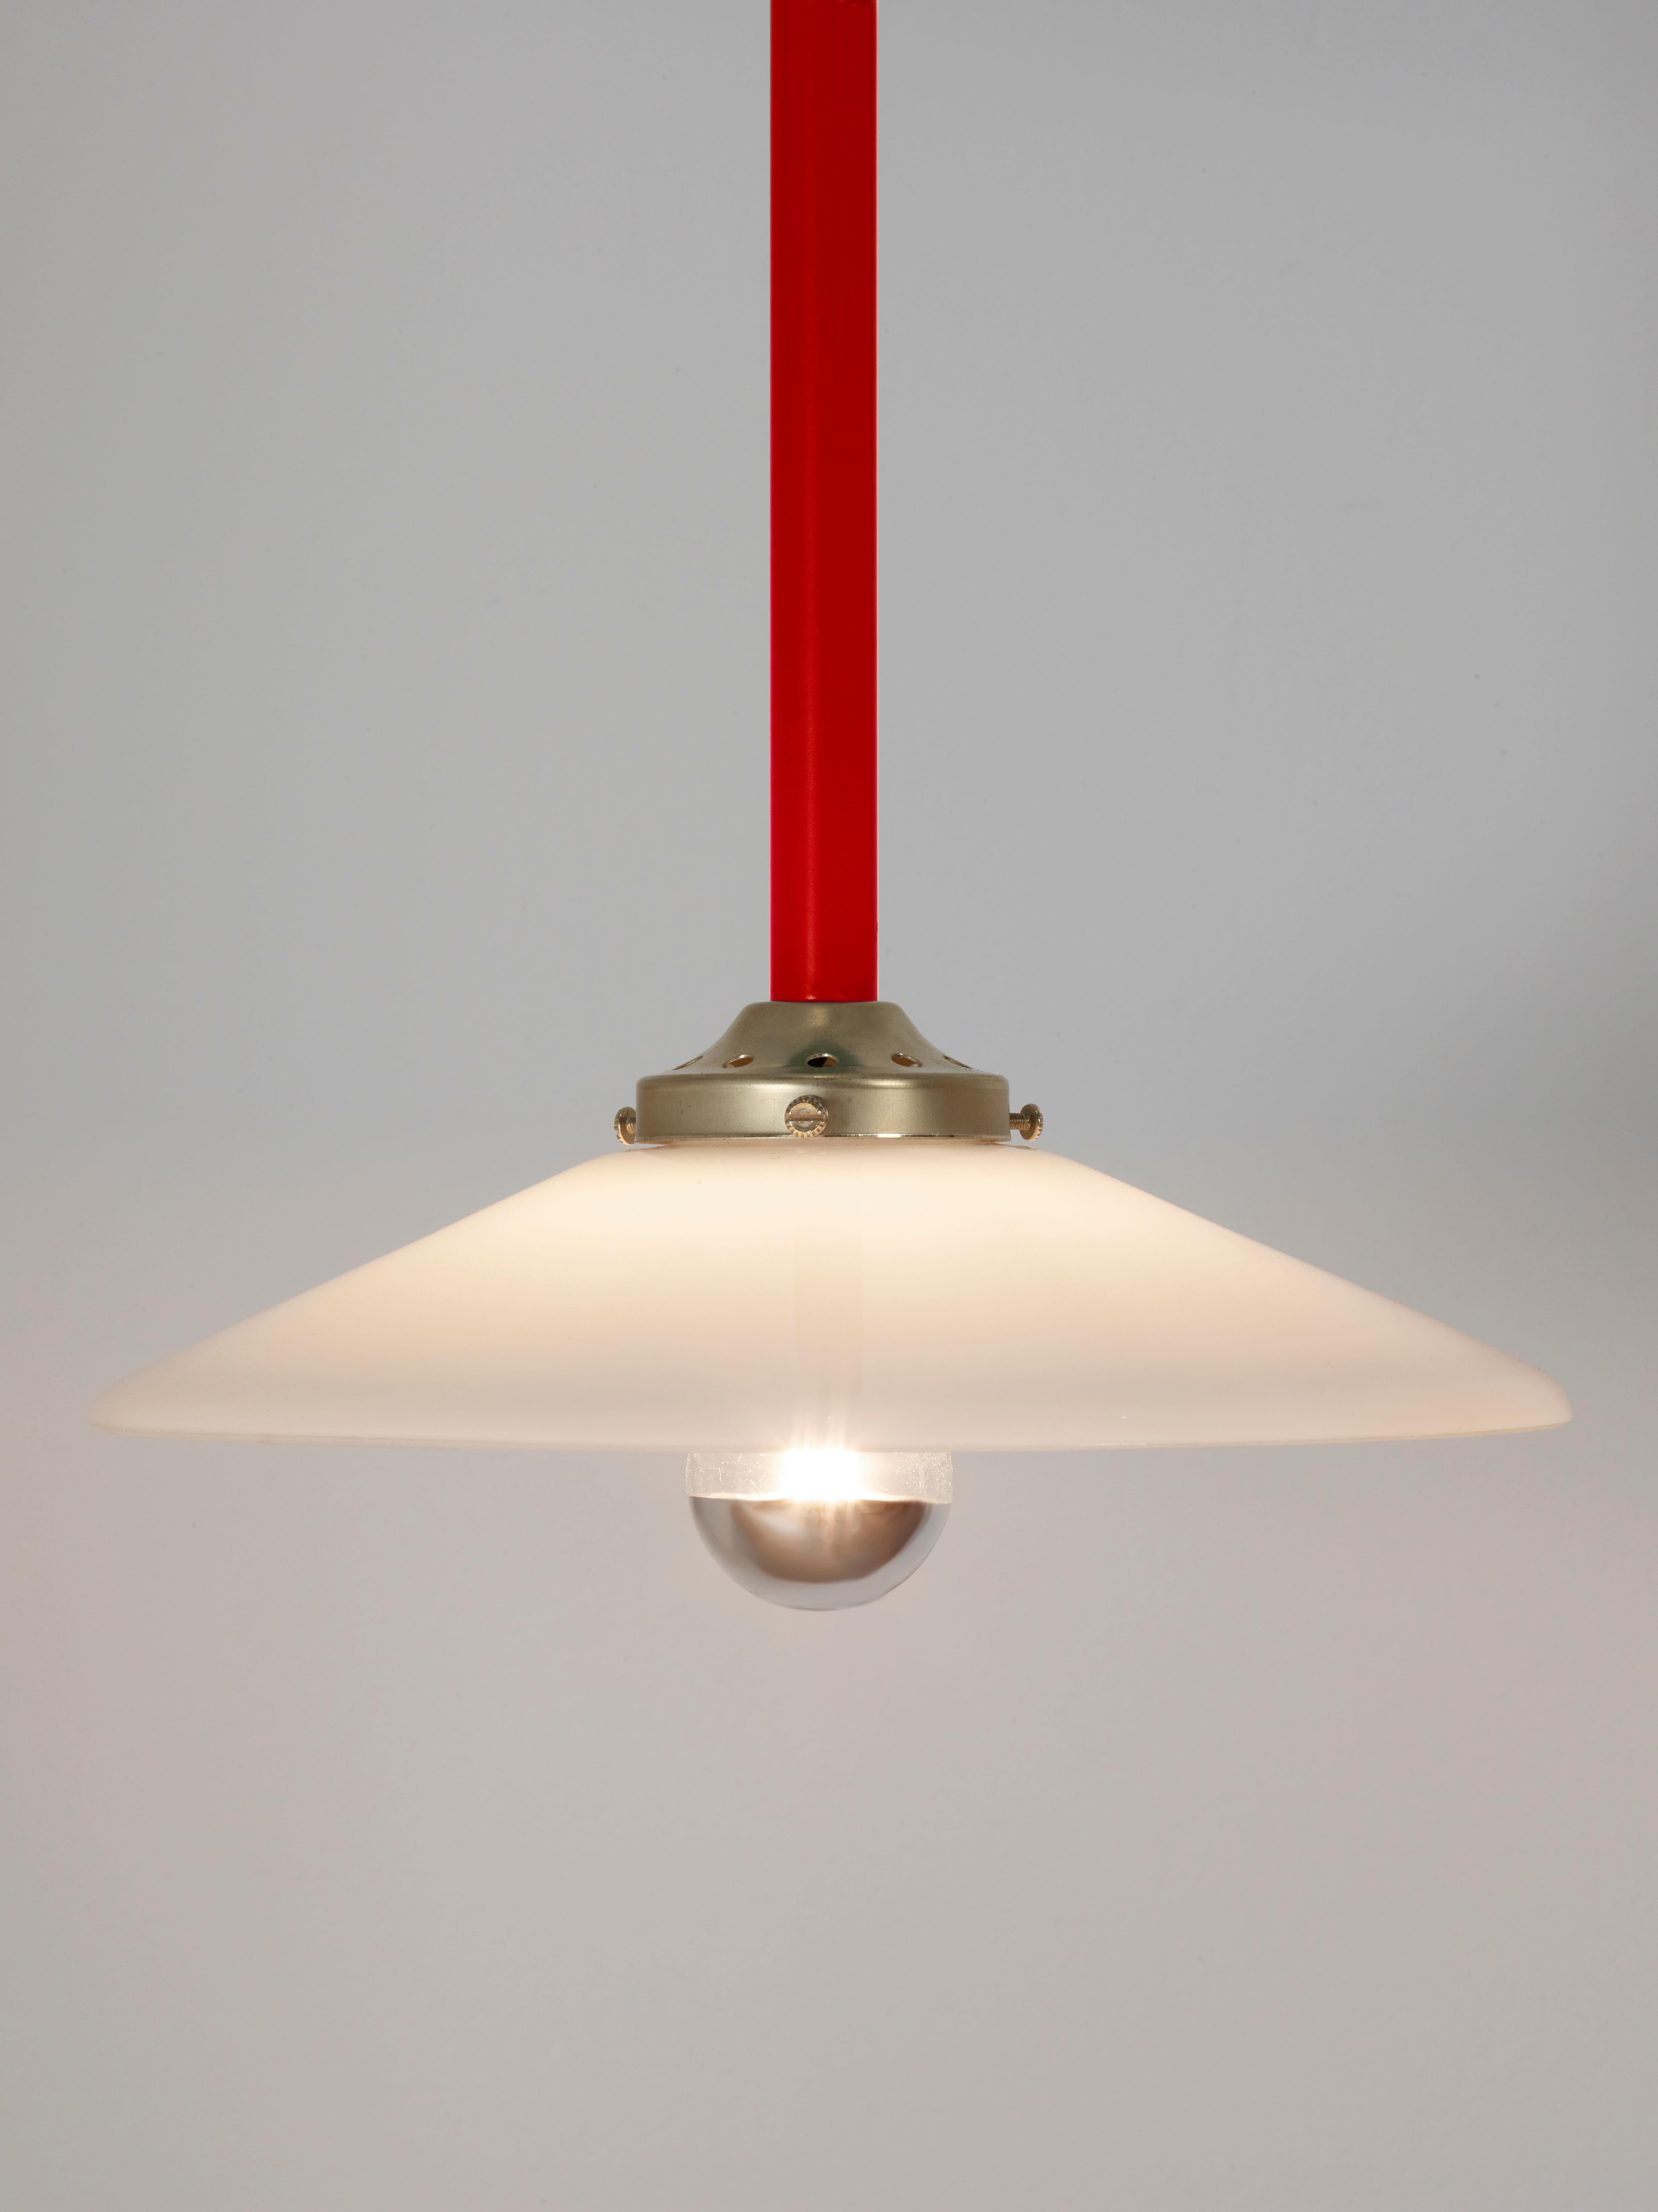 Contemporary Ceiling Lamp N°5 by Muller Van Severen x Valerie Objects, Red For Sale 12